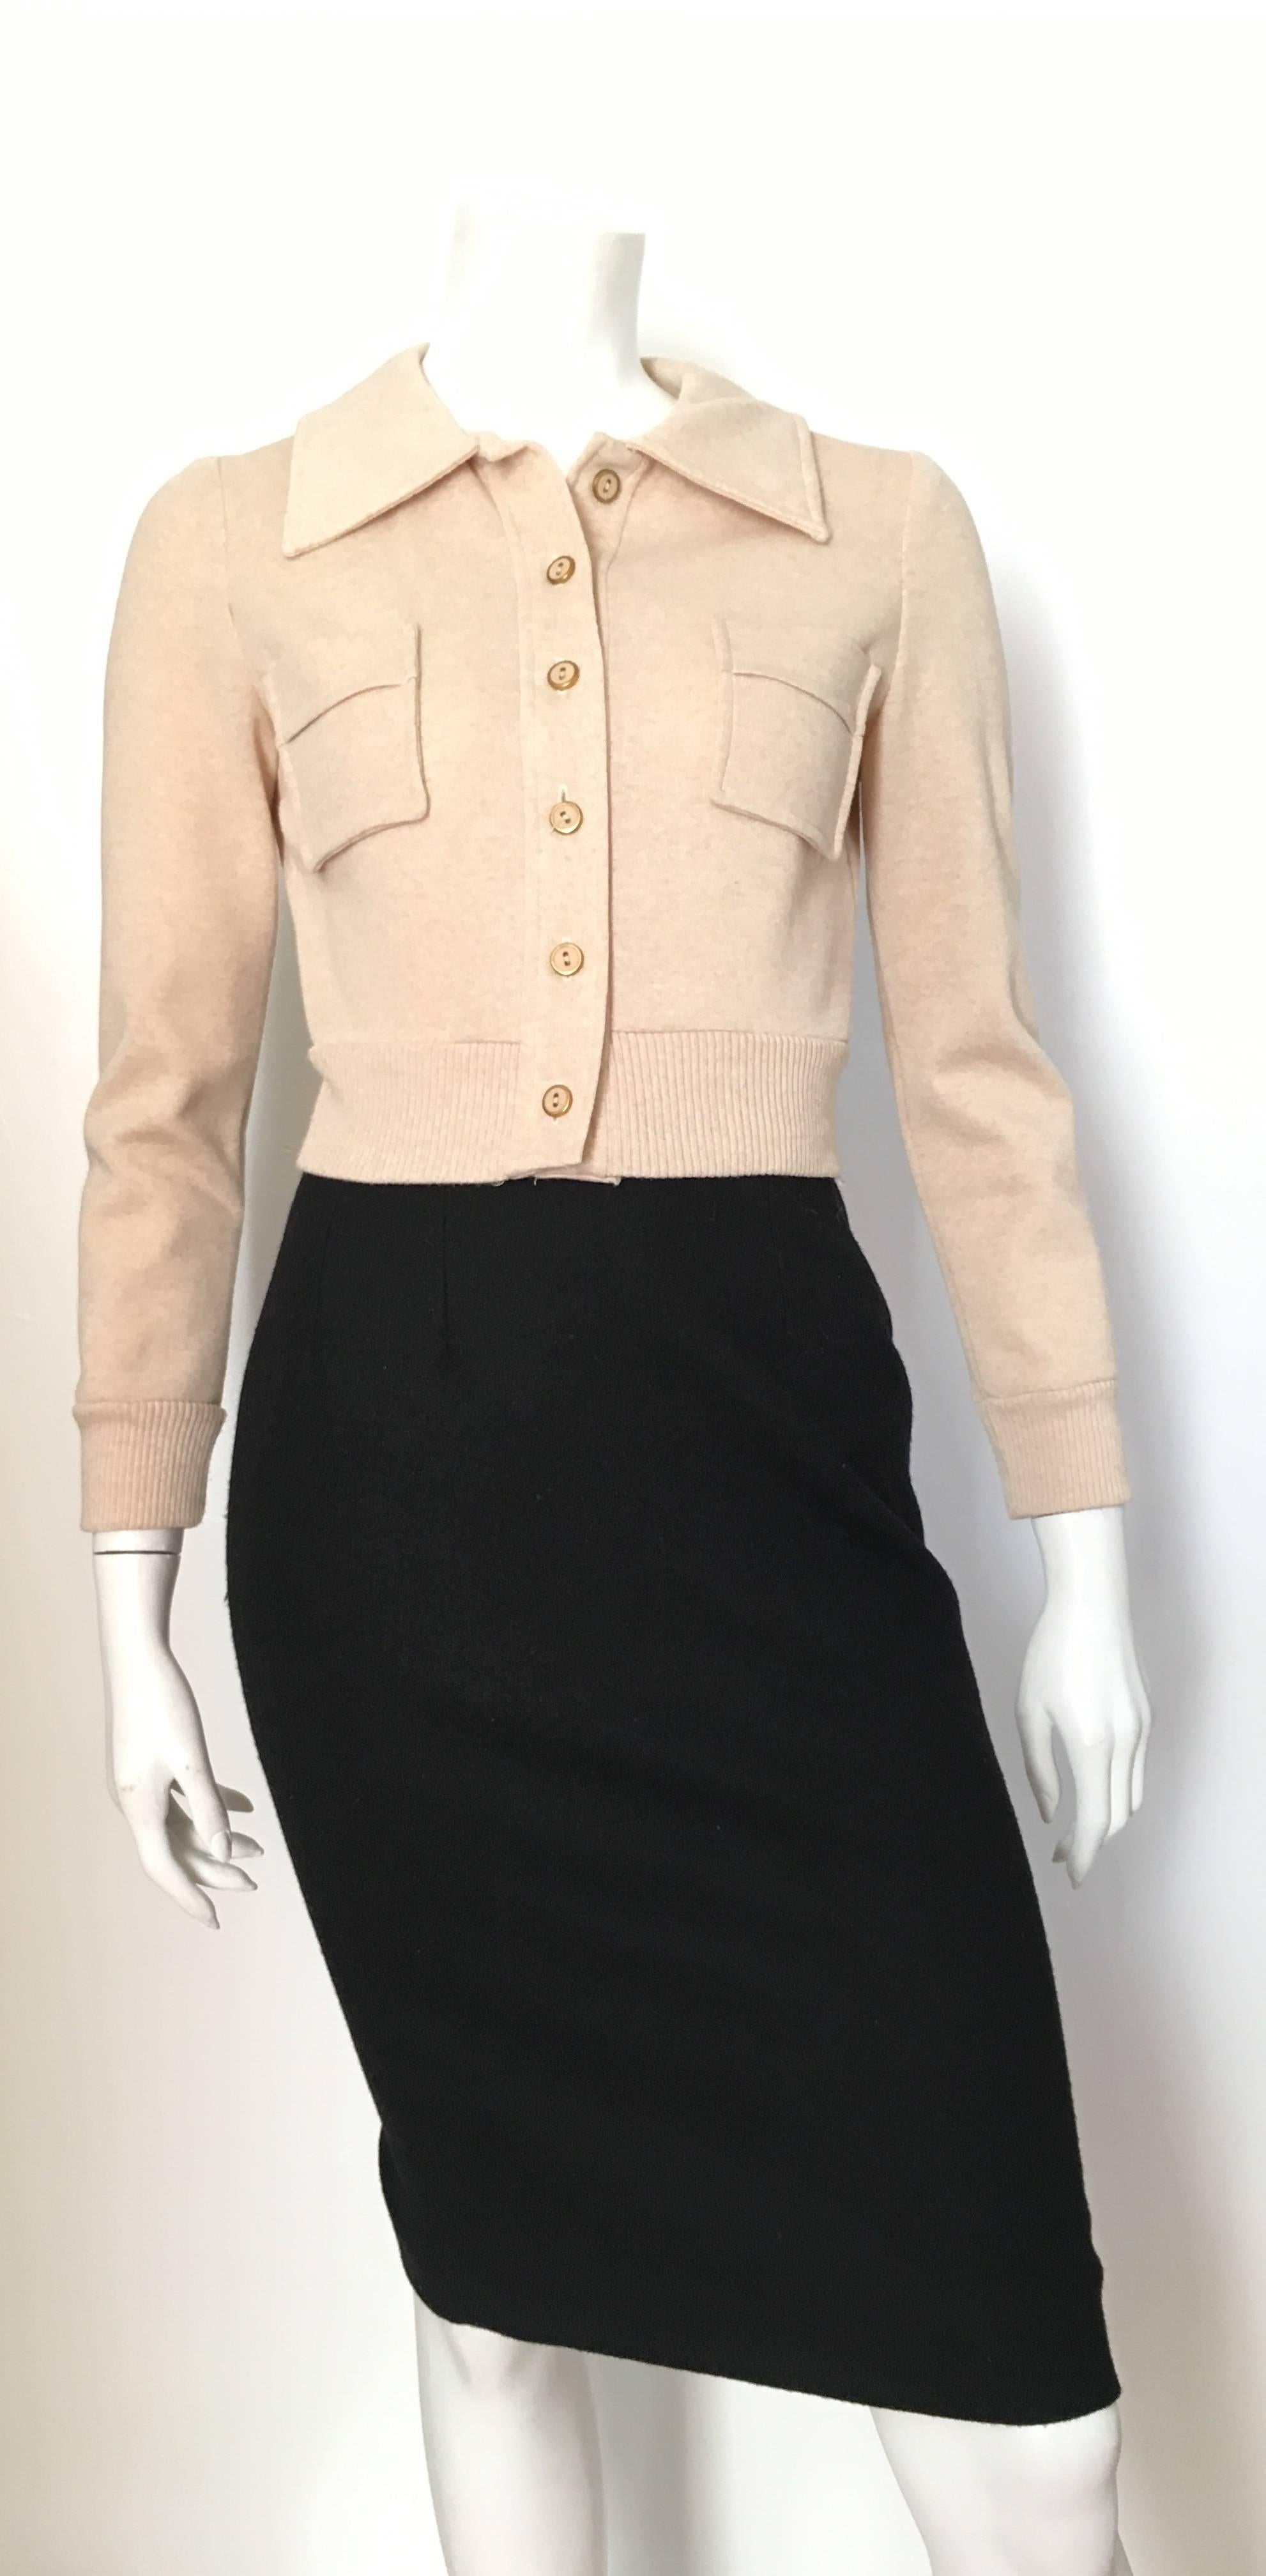 Neiman Marcus 1960s tan cropped knit jacket is a size 4. If your body type is like Matilda the Mannequin then this is for you...  This  can be a sporty look or a dressy look, either way this knit cropped jacket is divine. 
Measurements are:
35